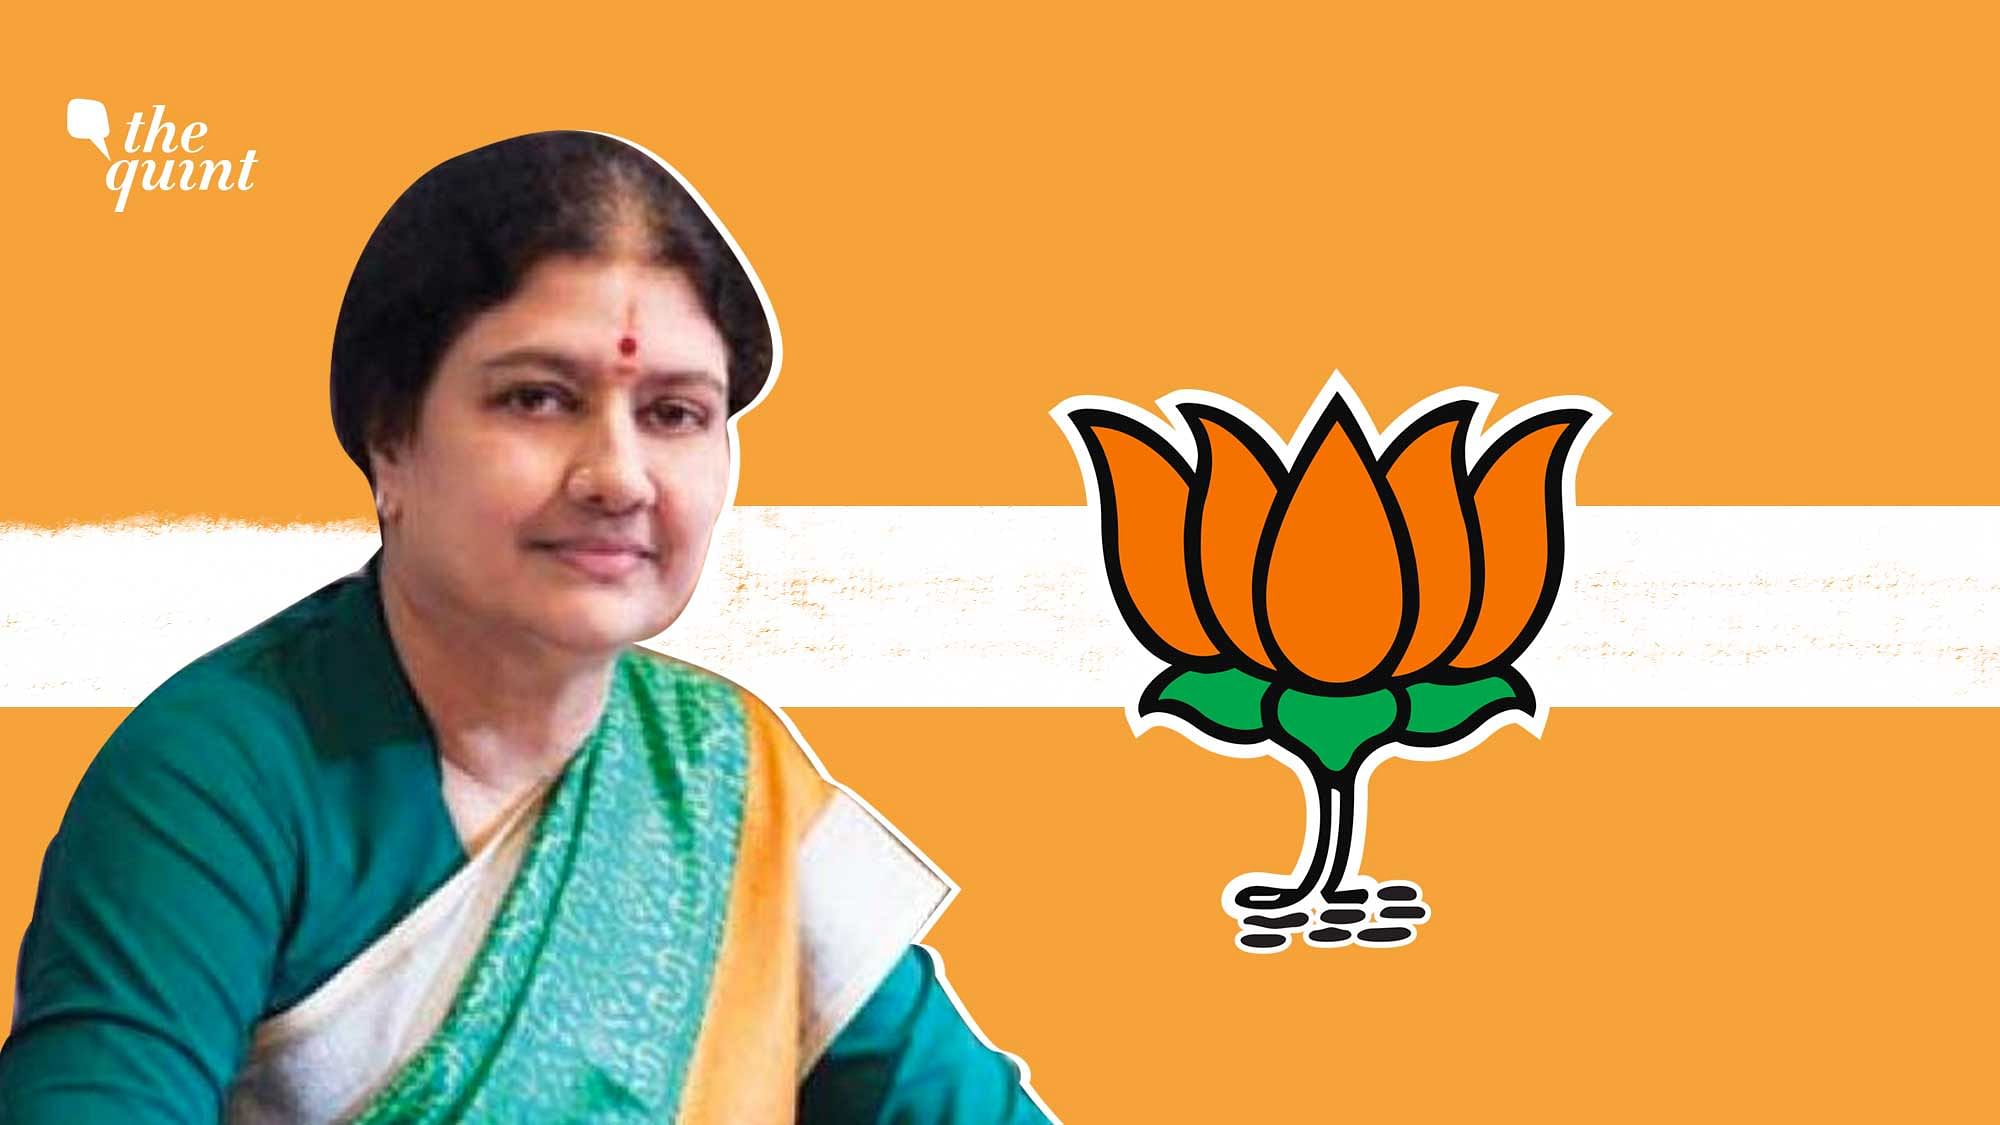 Image of VK Sasikala and BJP party symbol used for representational purposes.